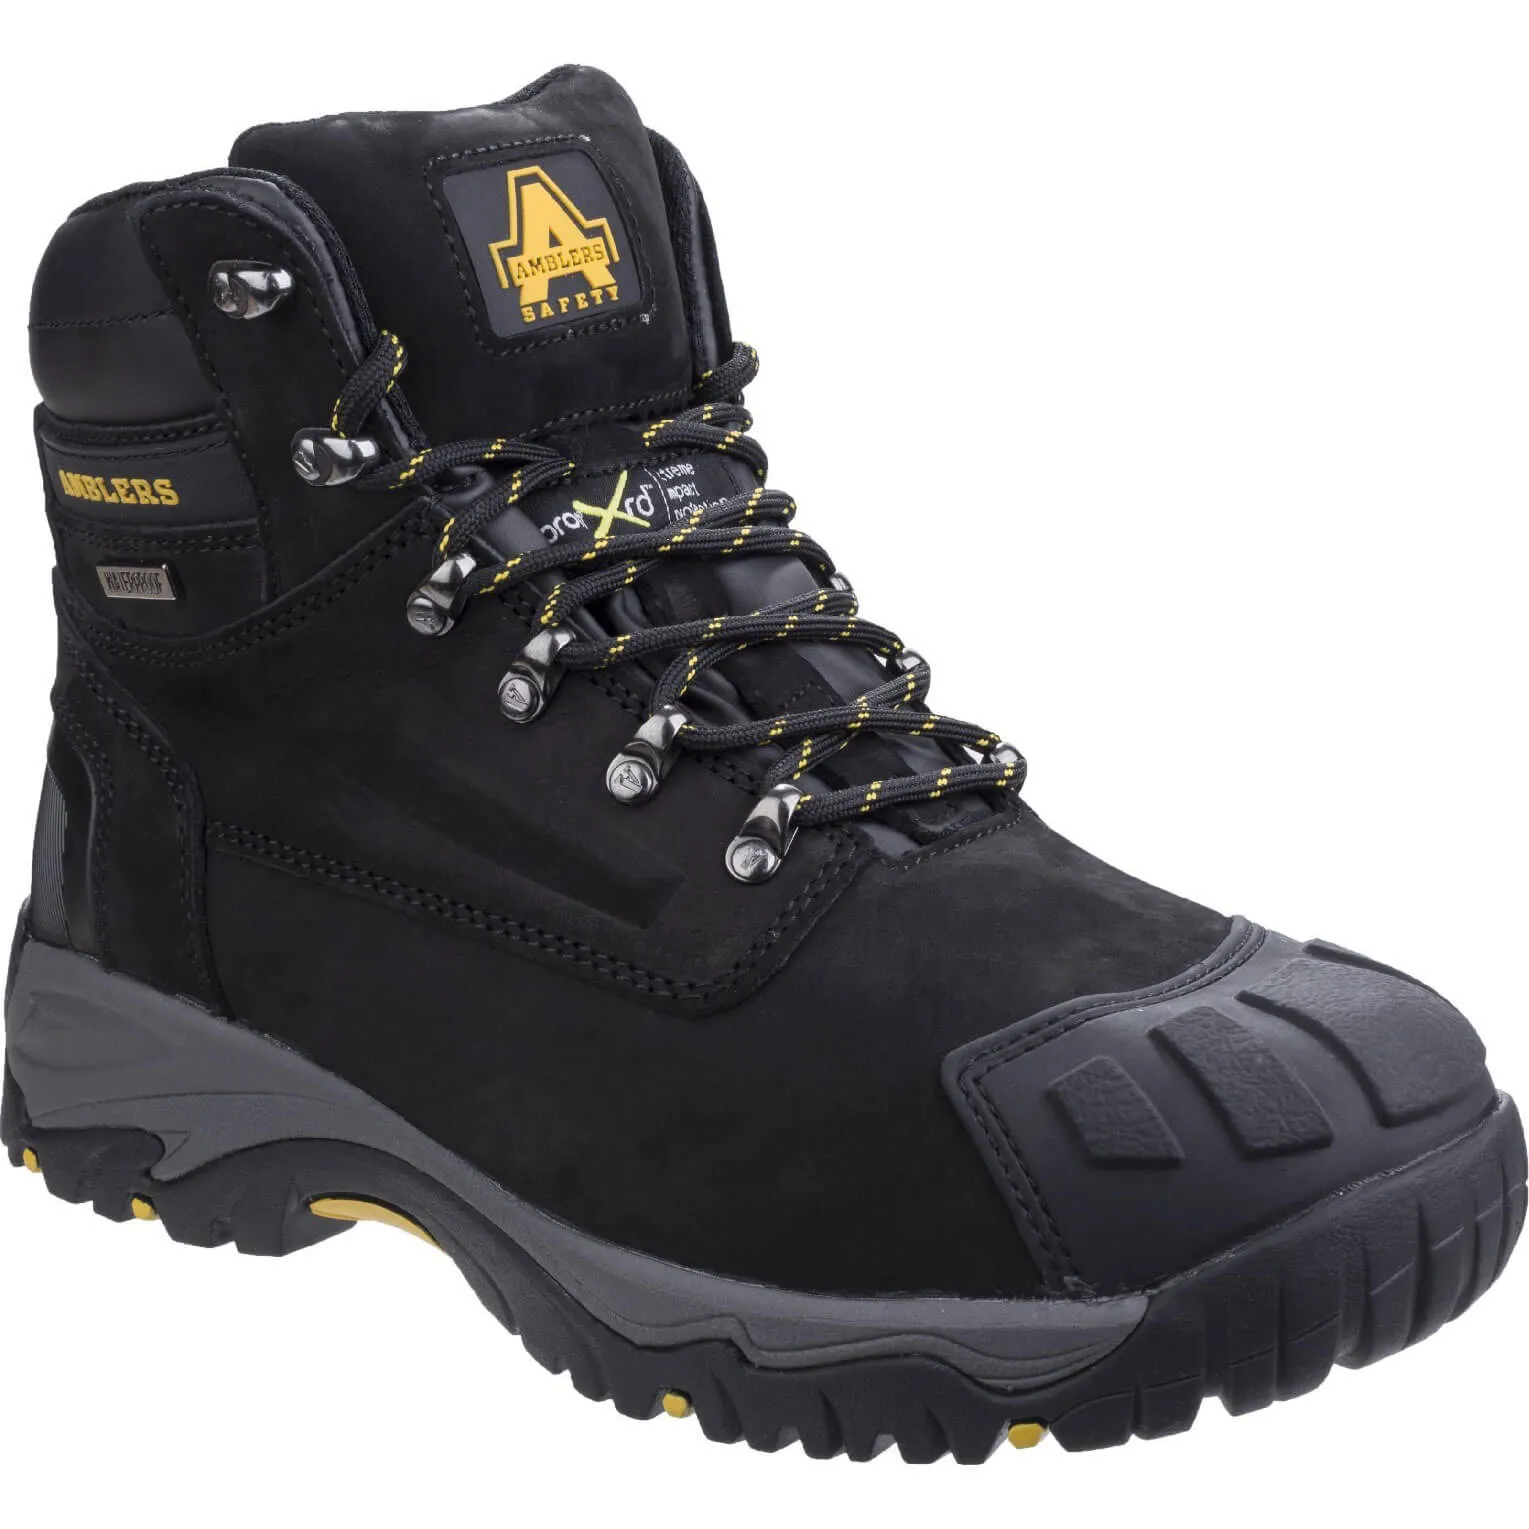 Amblers Mens Safety FS987 Metatarsal Protection Waterproof Safety Boots - Black, Size 12